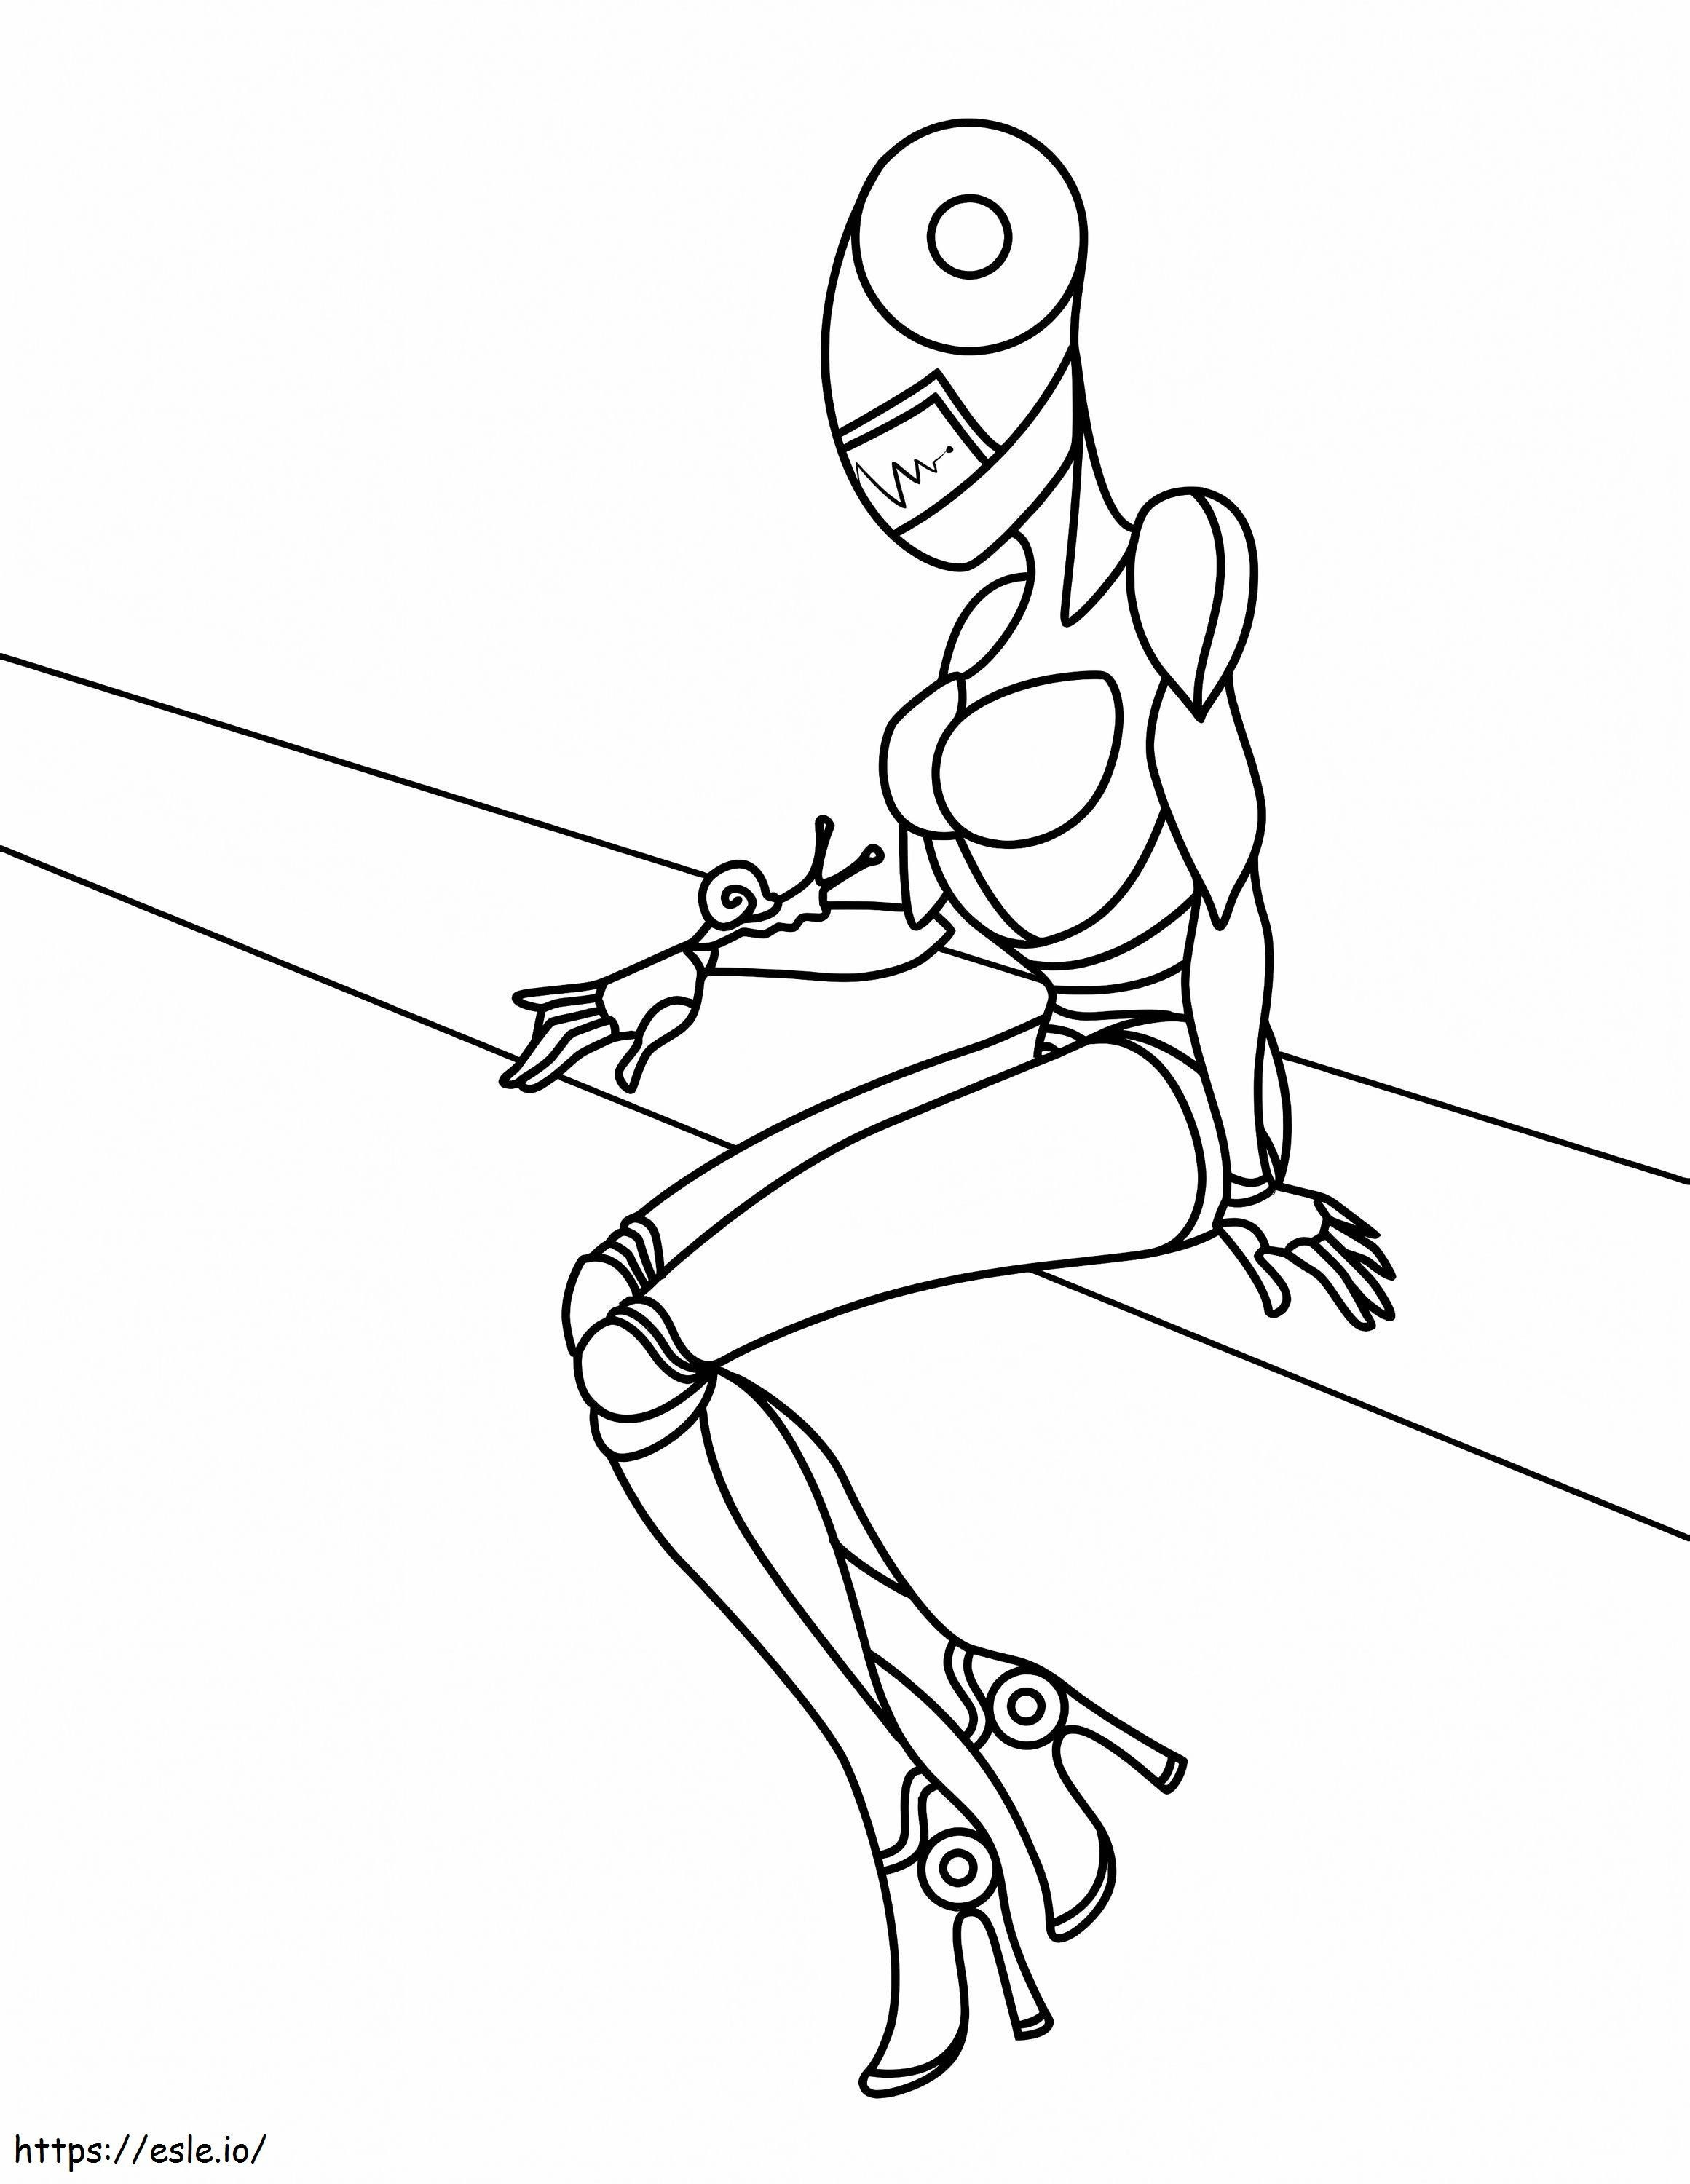 Lady Robot Snail coloring page